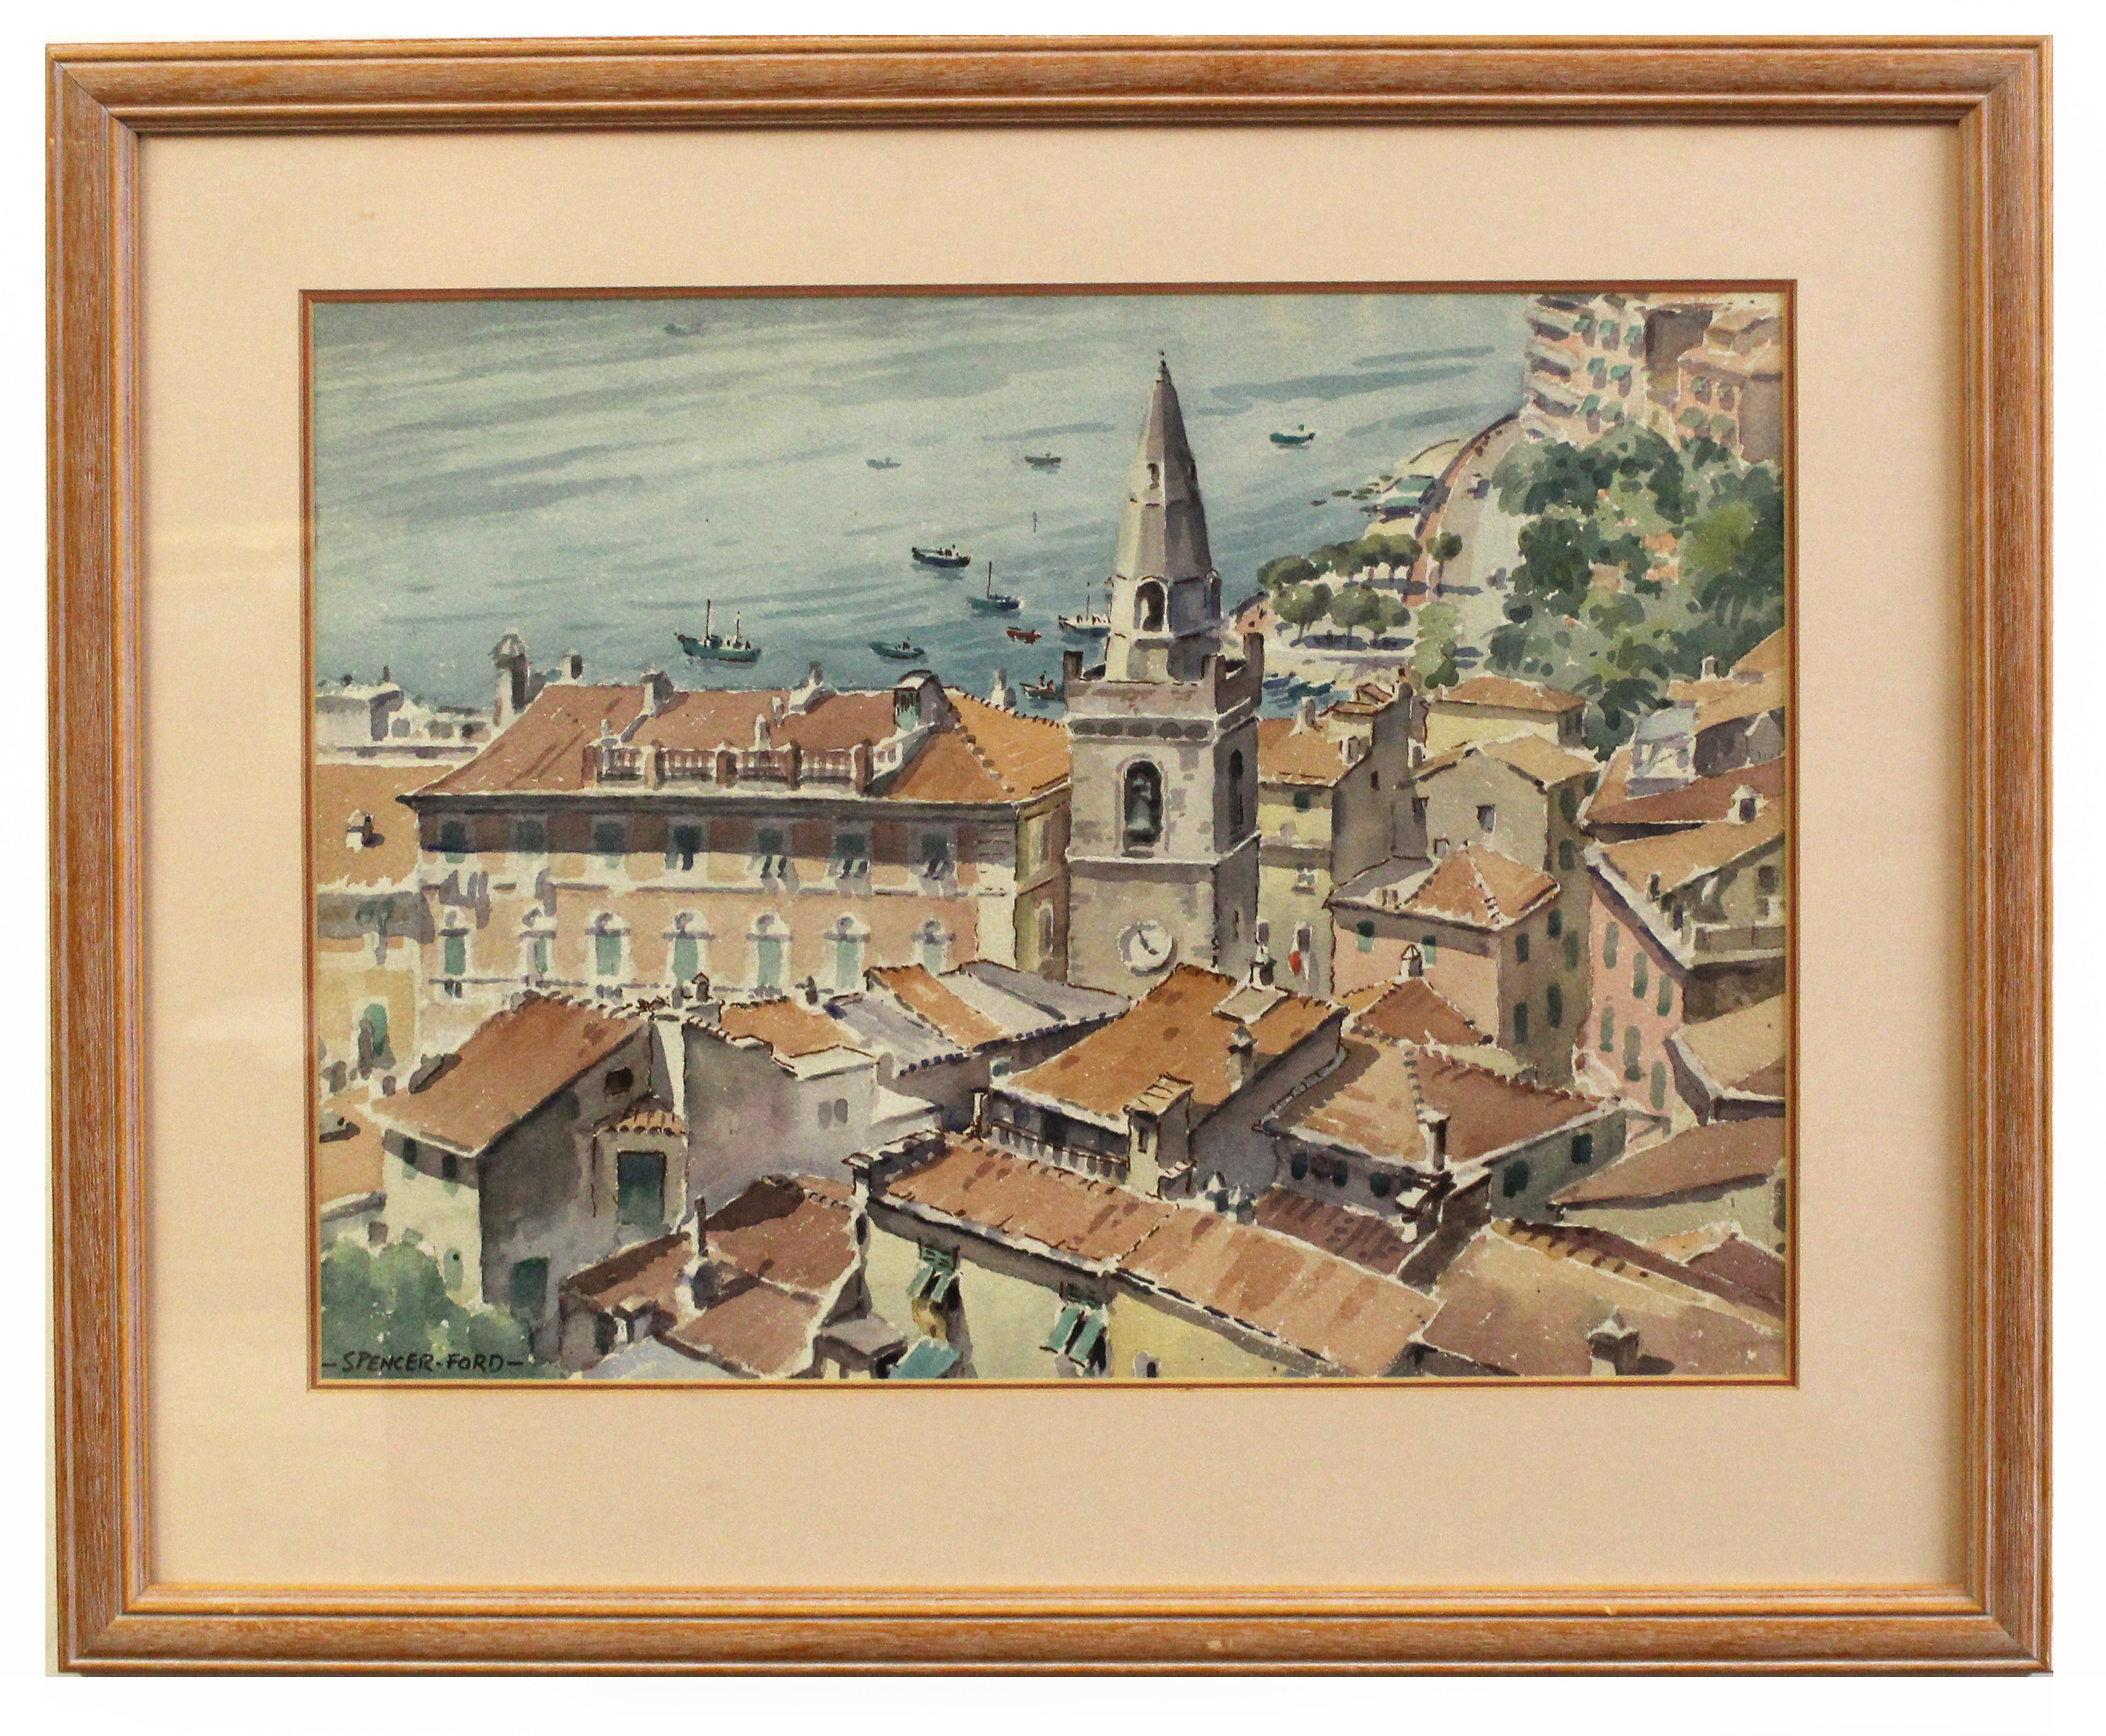 AR Roland F Spencer Ford (1902-1990), Harbour Town, watercolour, signed lower left, 37 x 47cm